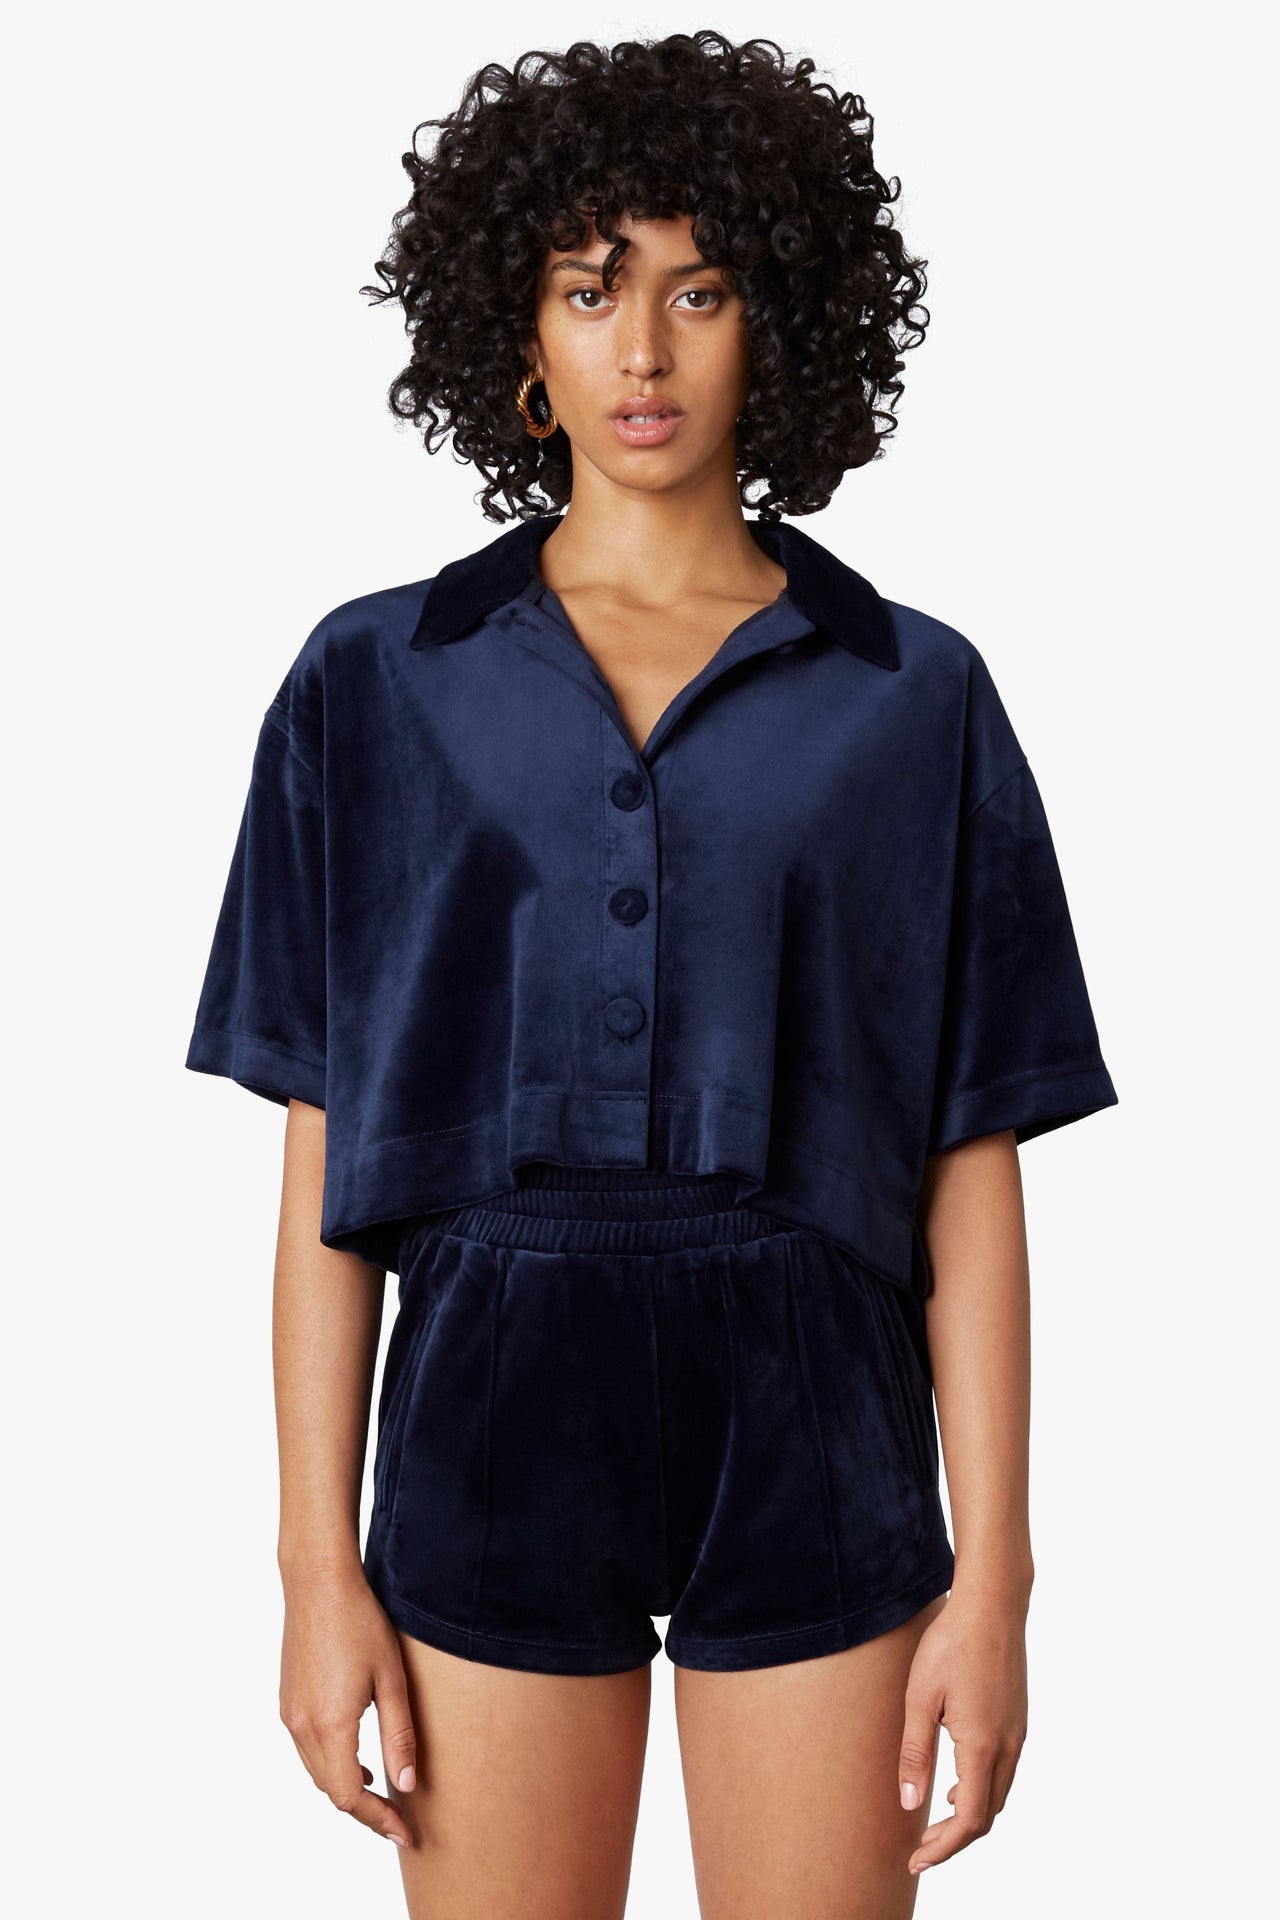 Velour Cropped Shirt Navy, Tee Casuals by NIA | LIT Boutique